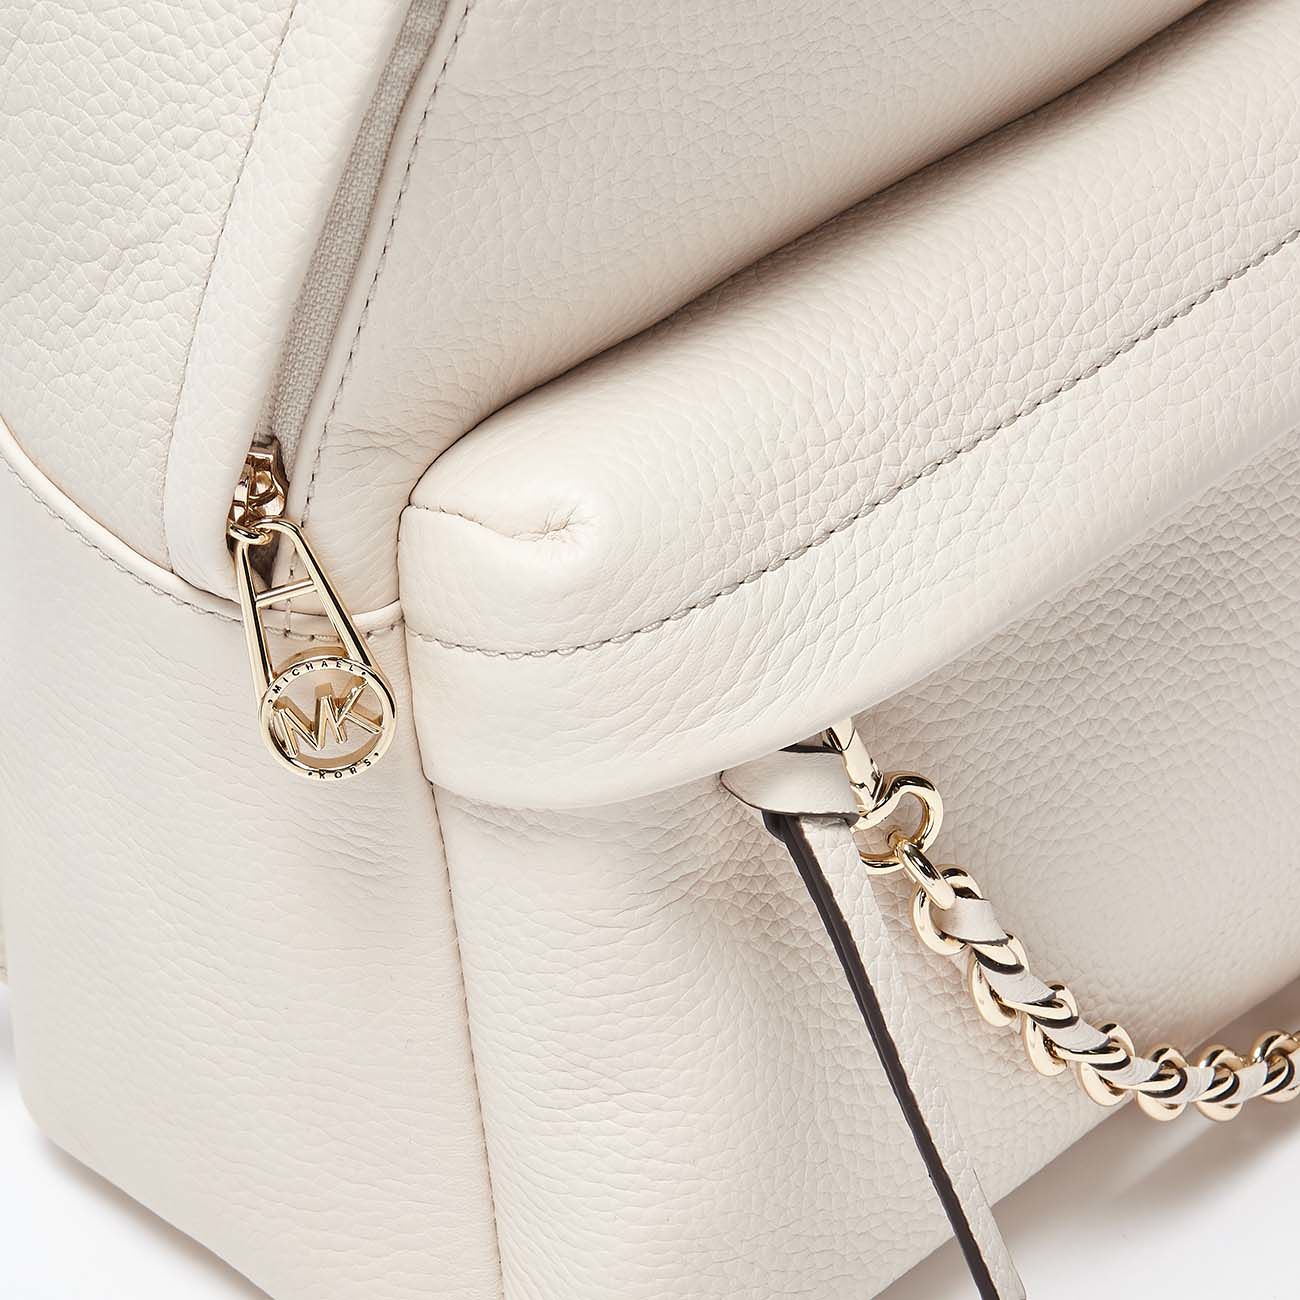 MICHAEL KORS SLATER BACKPACK IN HAMMERED LEATHER WITH GOLD CHAIN Woman  Cream